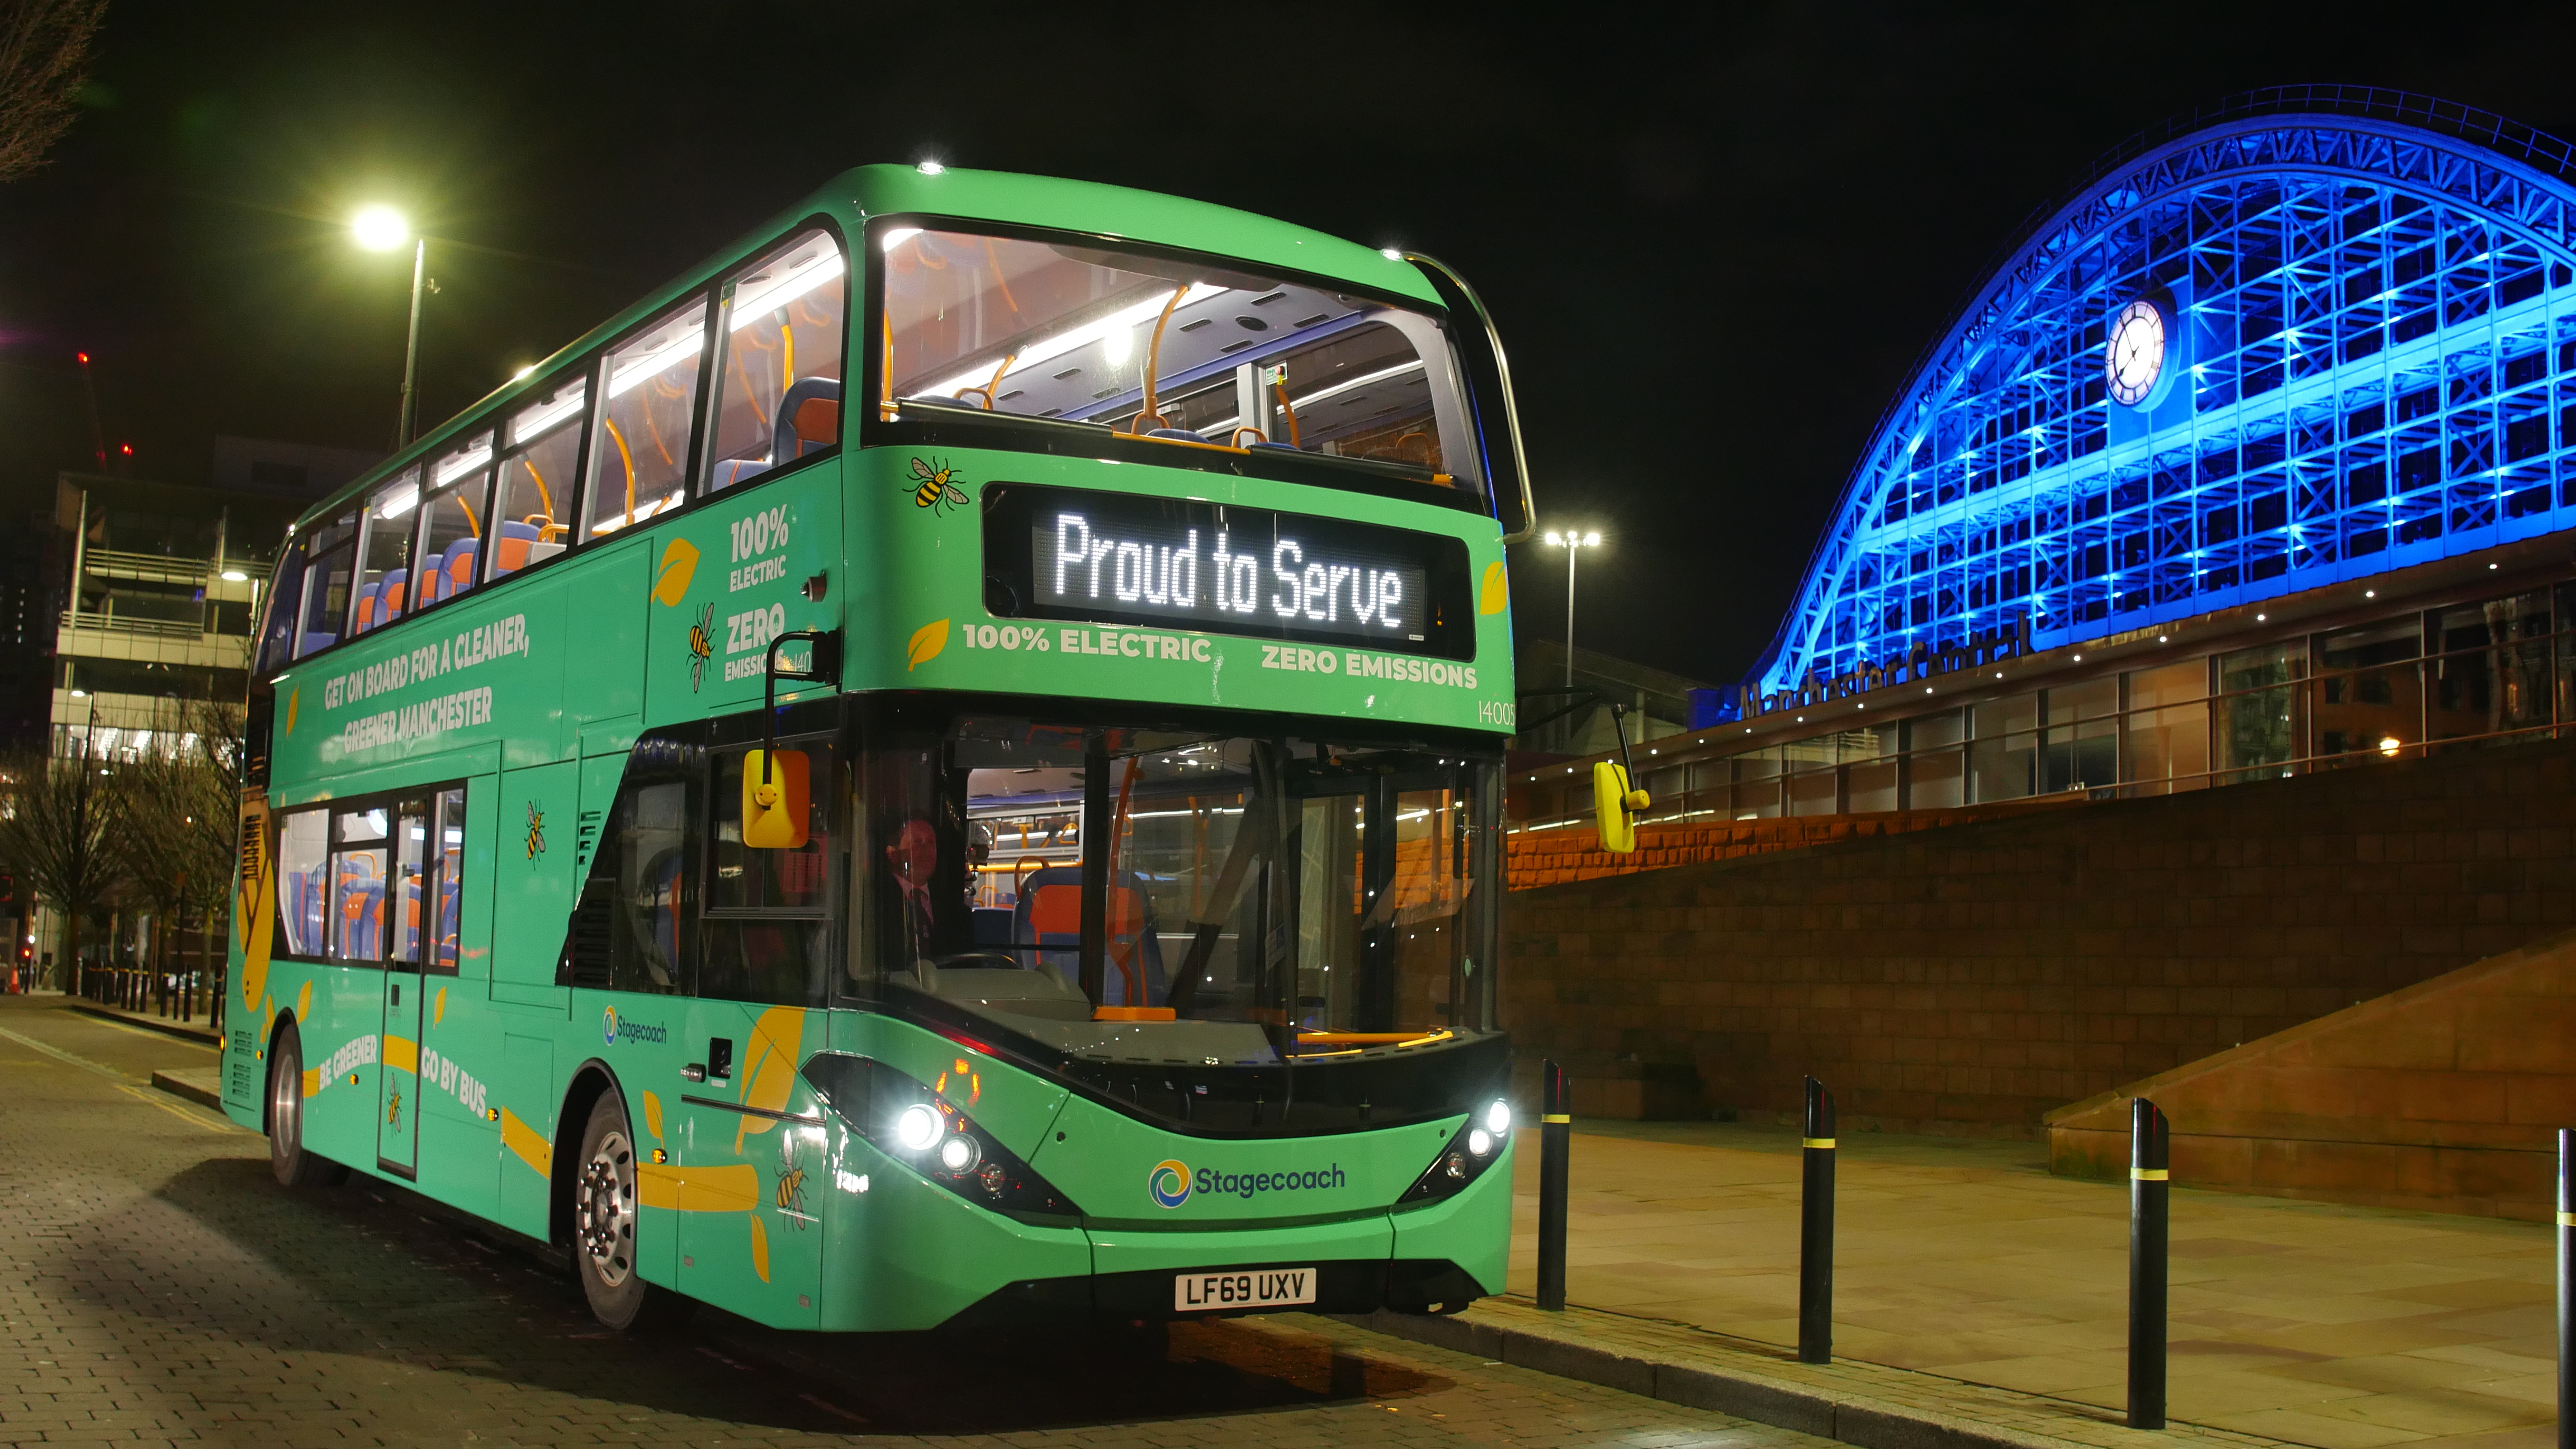 Manchester bus franchising debate continues